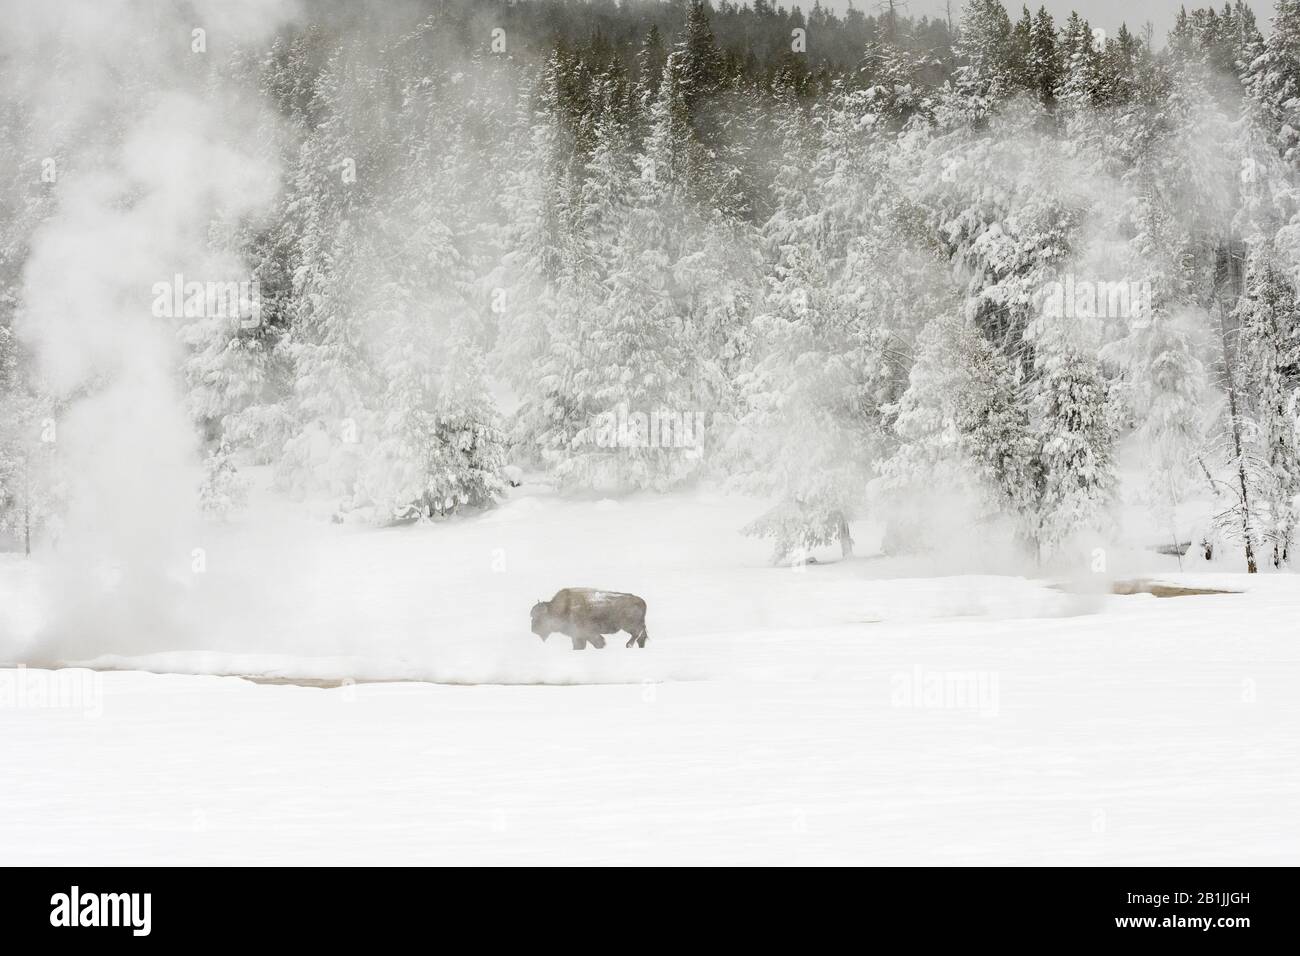 American bison, buffalo (Bison bison), in snowy landscape, USA, Wyoming, Yellowstone National Park Stock Photo